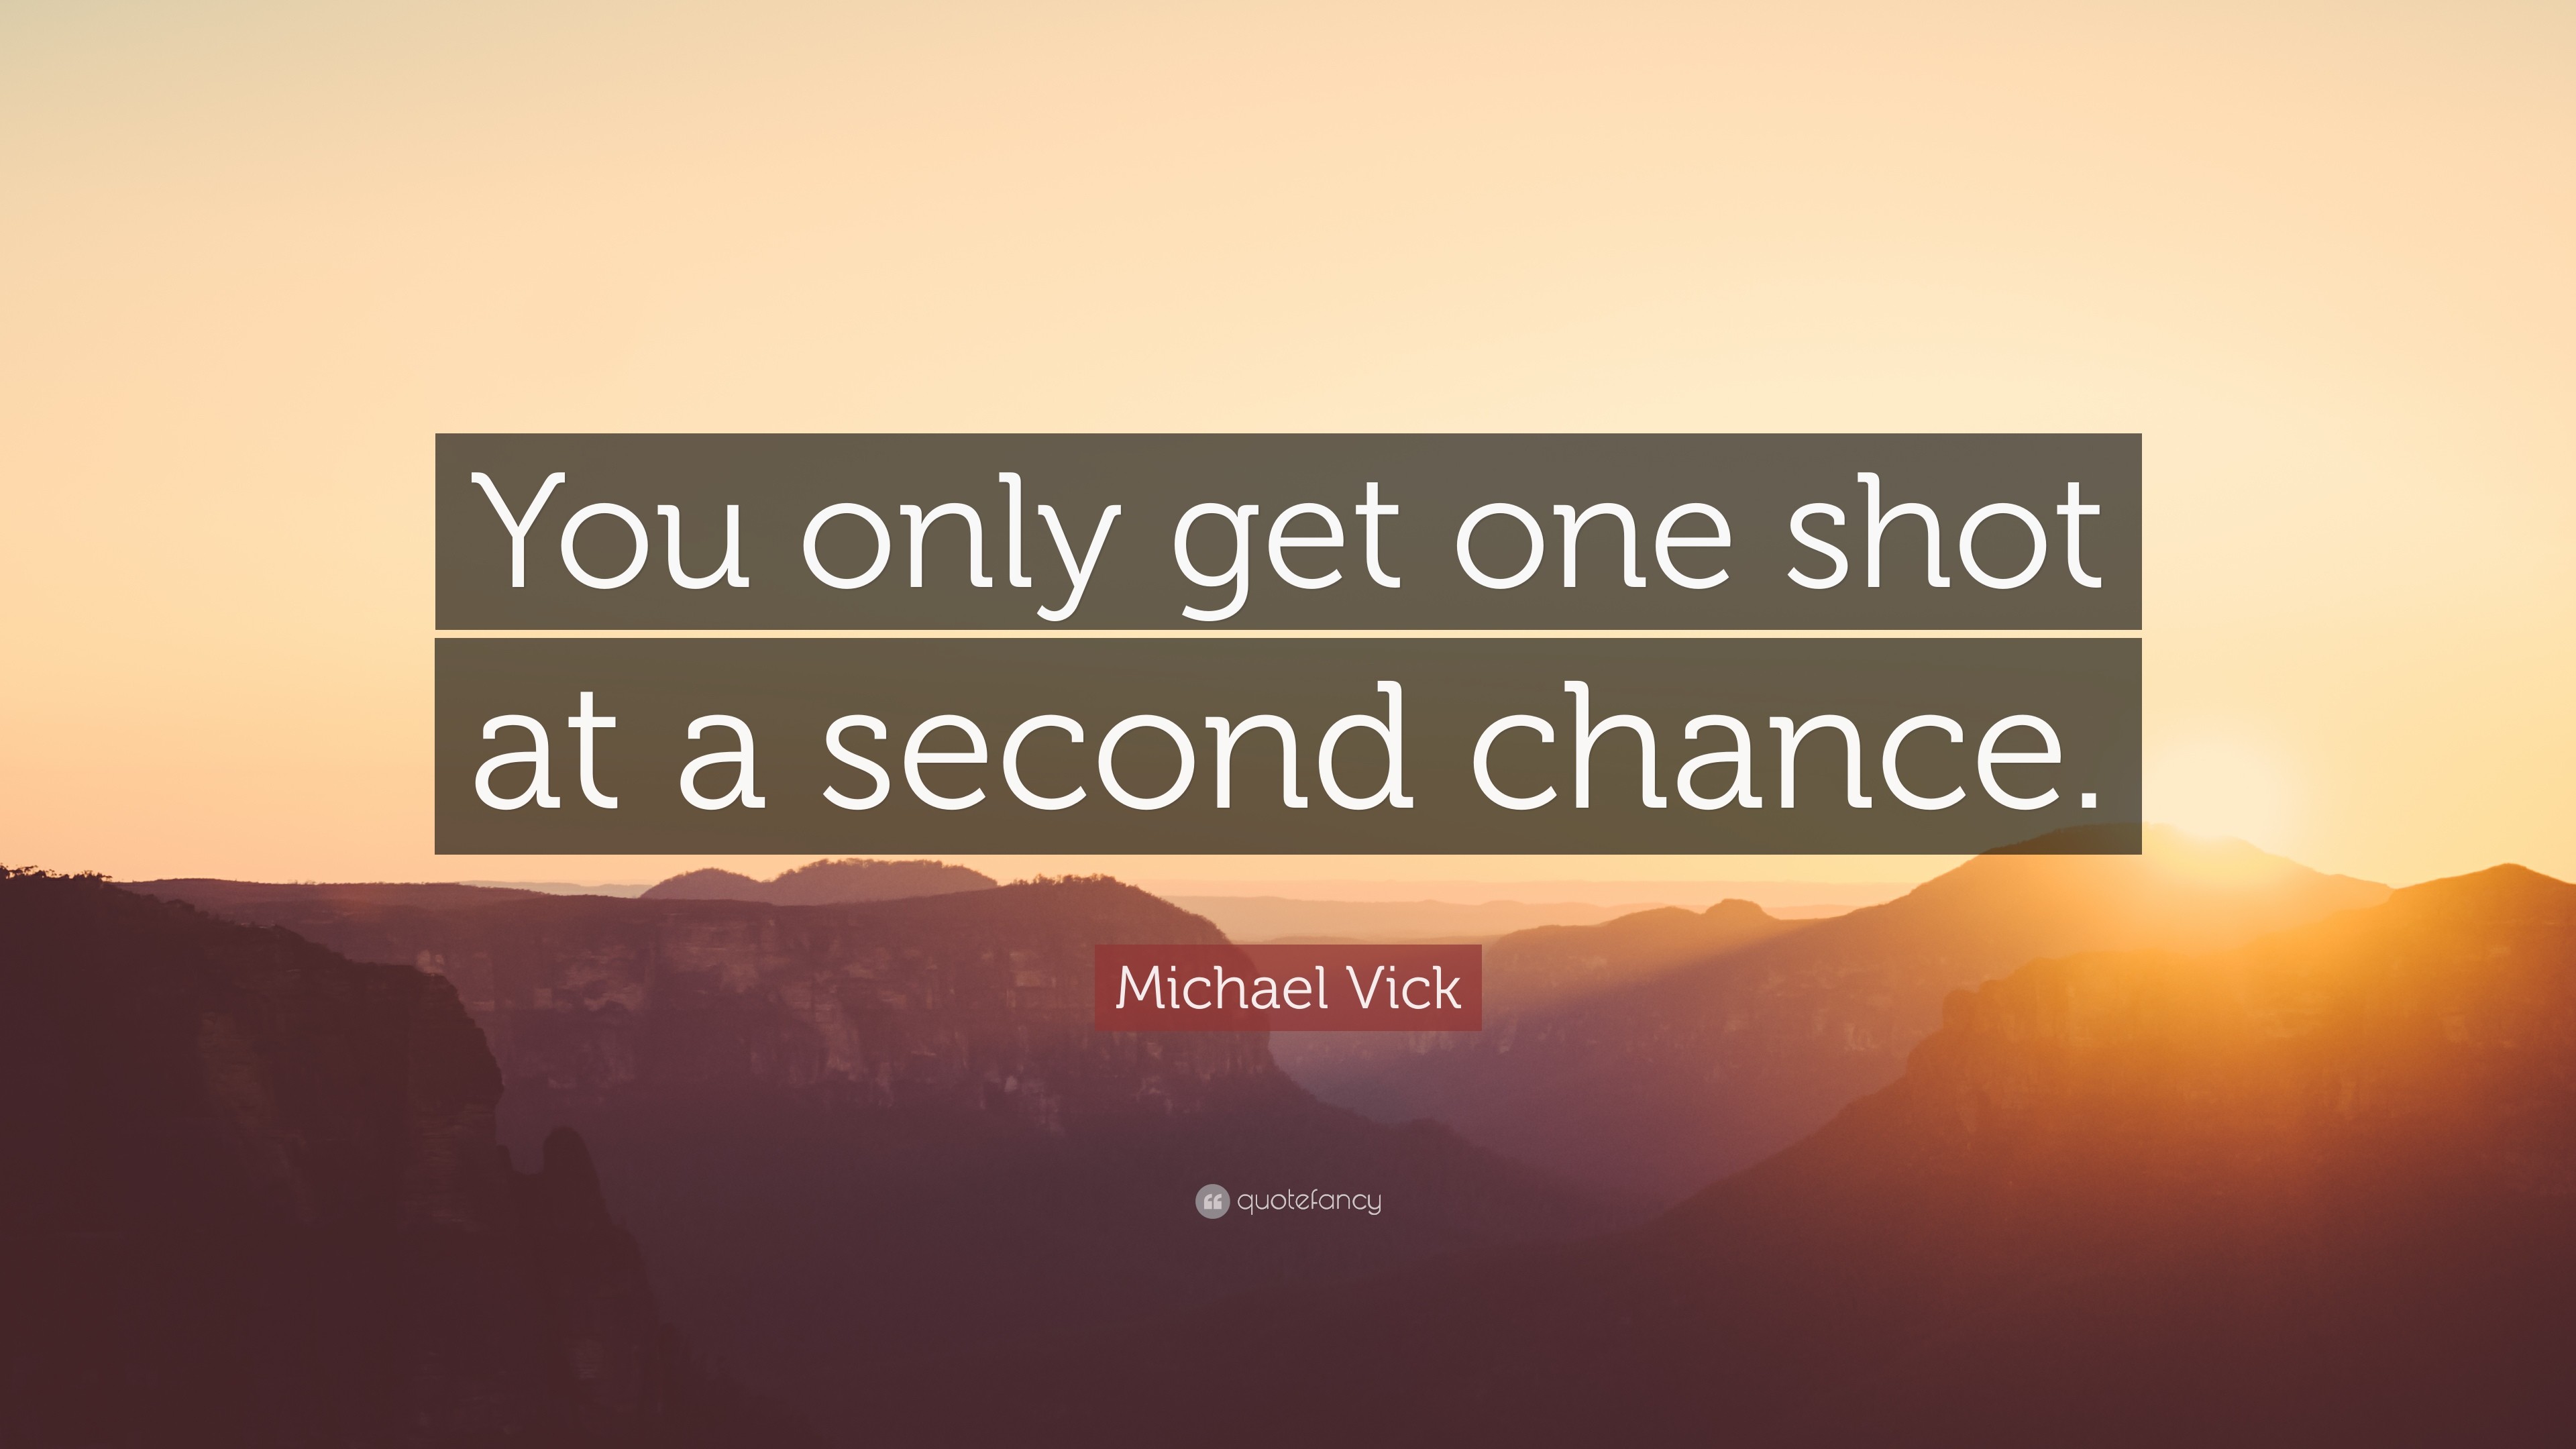 3840x2160 Michael Vick Quote: “You only get one shot at a second chance.”